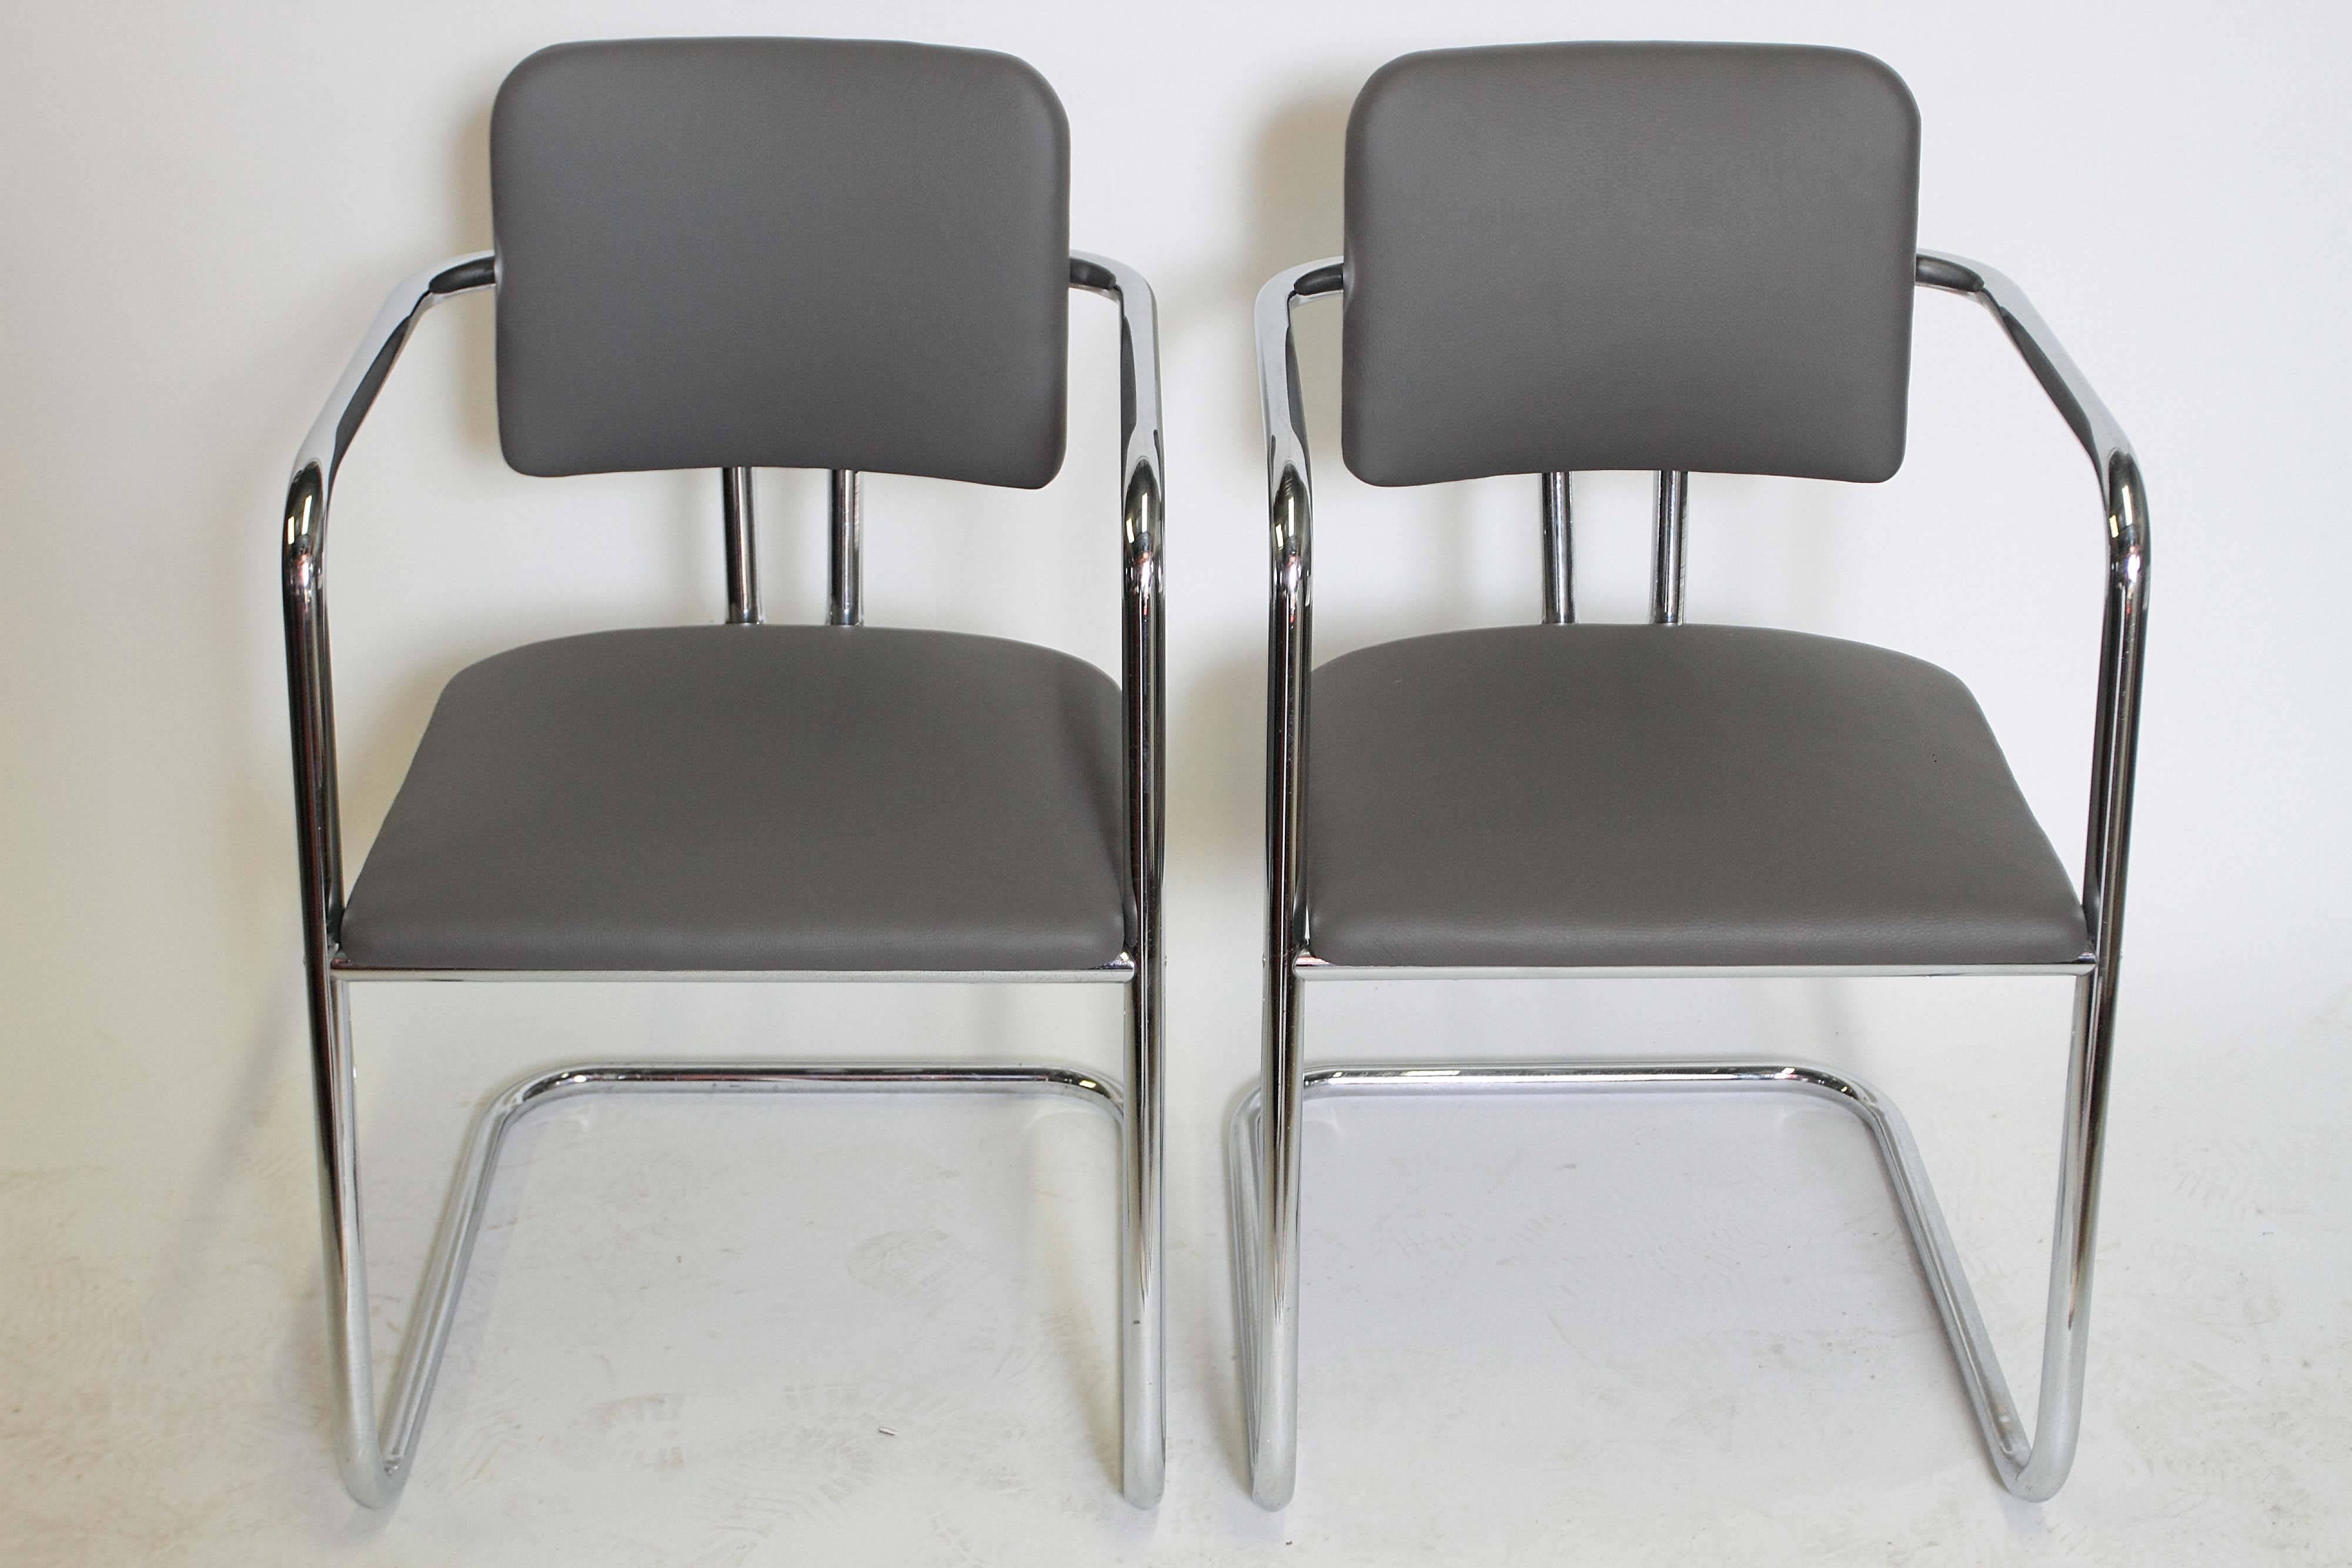 Simply not the common Rohde side and armchairs seen frequently, and attributed loosely.
Rare signed pair of Troy cat #185 club chairs.
Canted and cantilevered streamline arm chairs.

Circa 1935, restored, new leather and studs, exc. original